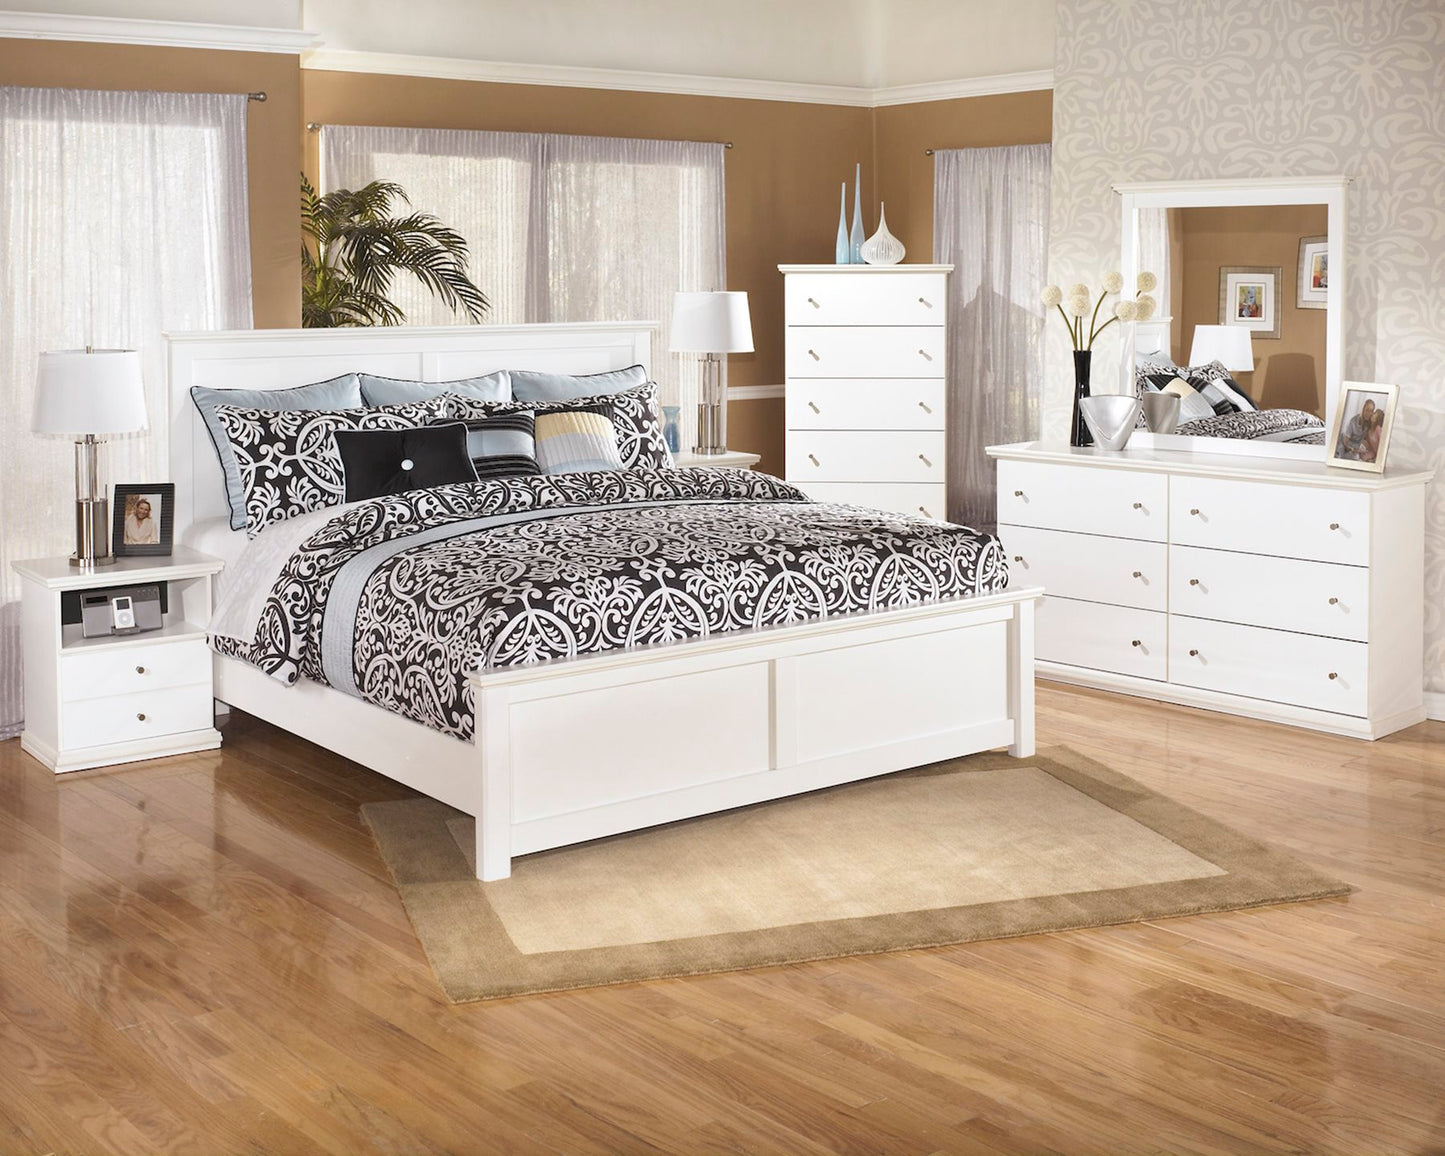 Ashley Bostwick Shoals 4 PC Queen Panel Bedroom Set in White - The Furniture Space.